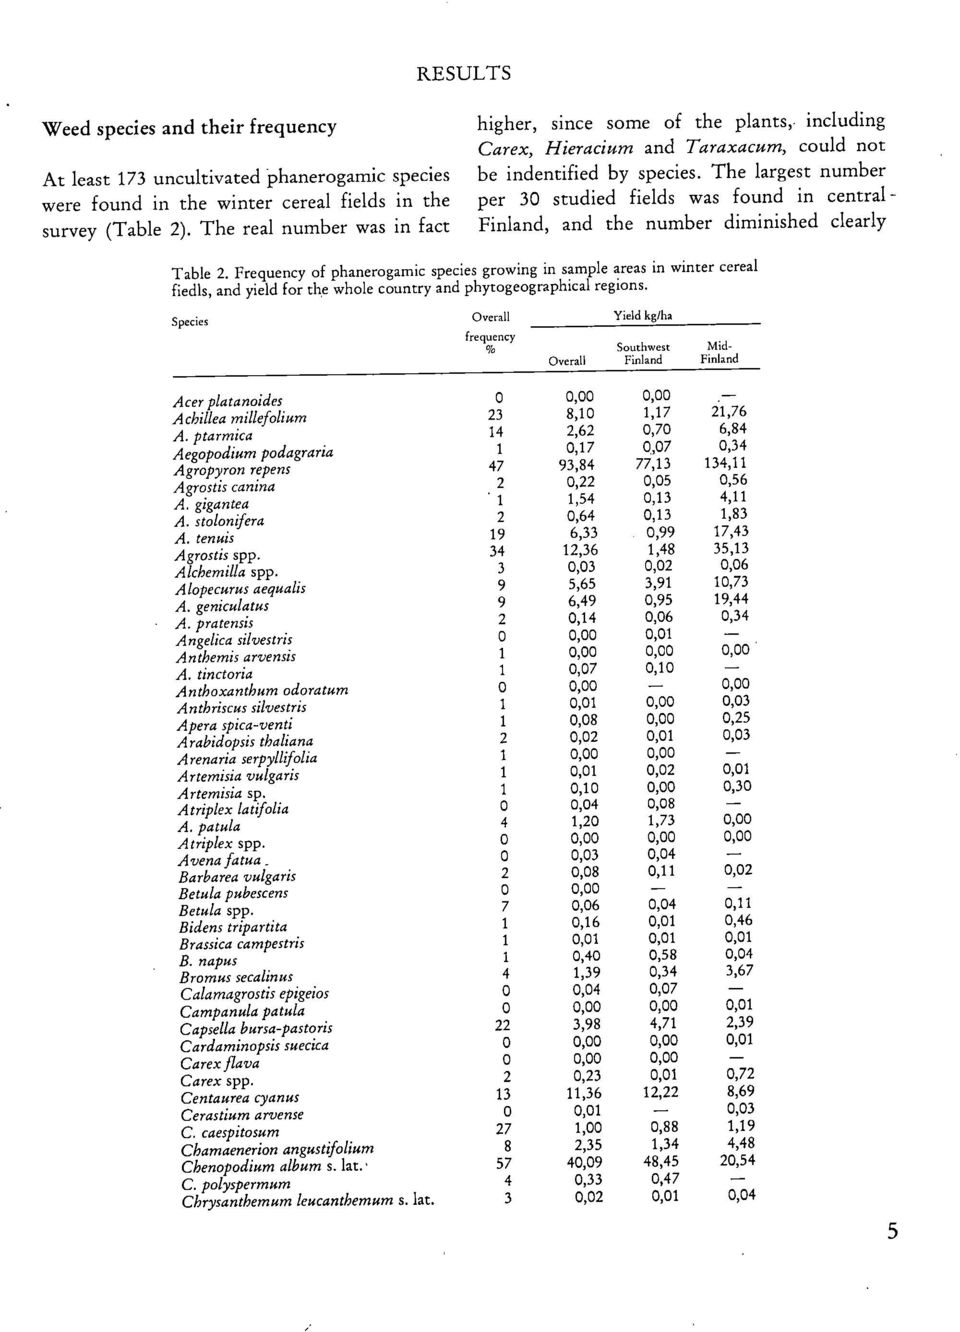 The largest number per 30 studied fields was found in central - Finland, and the number diminished clearly Table 2.